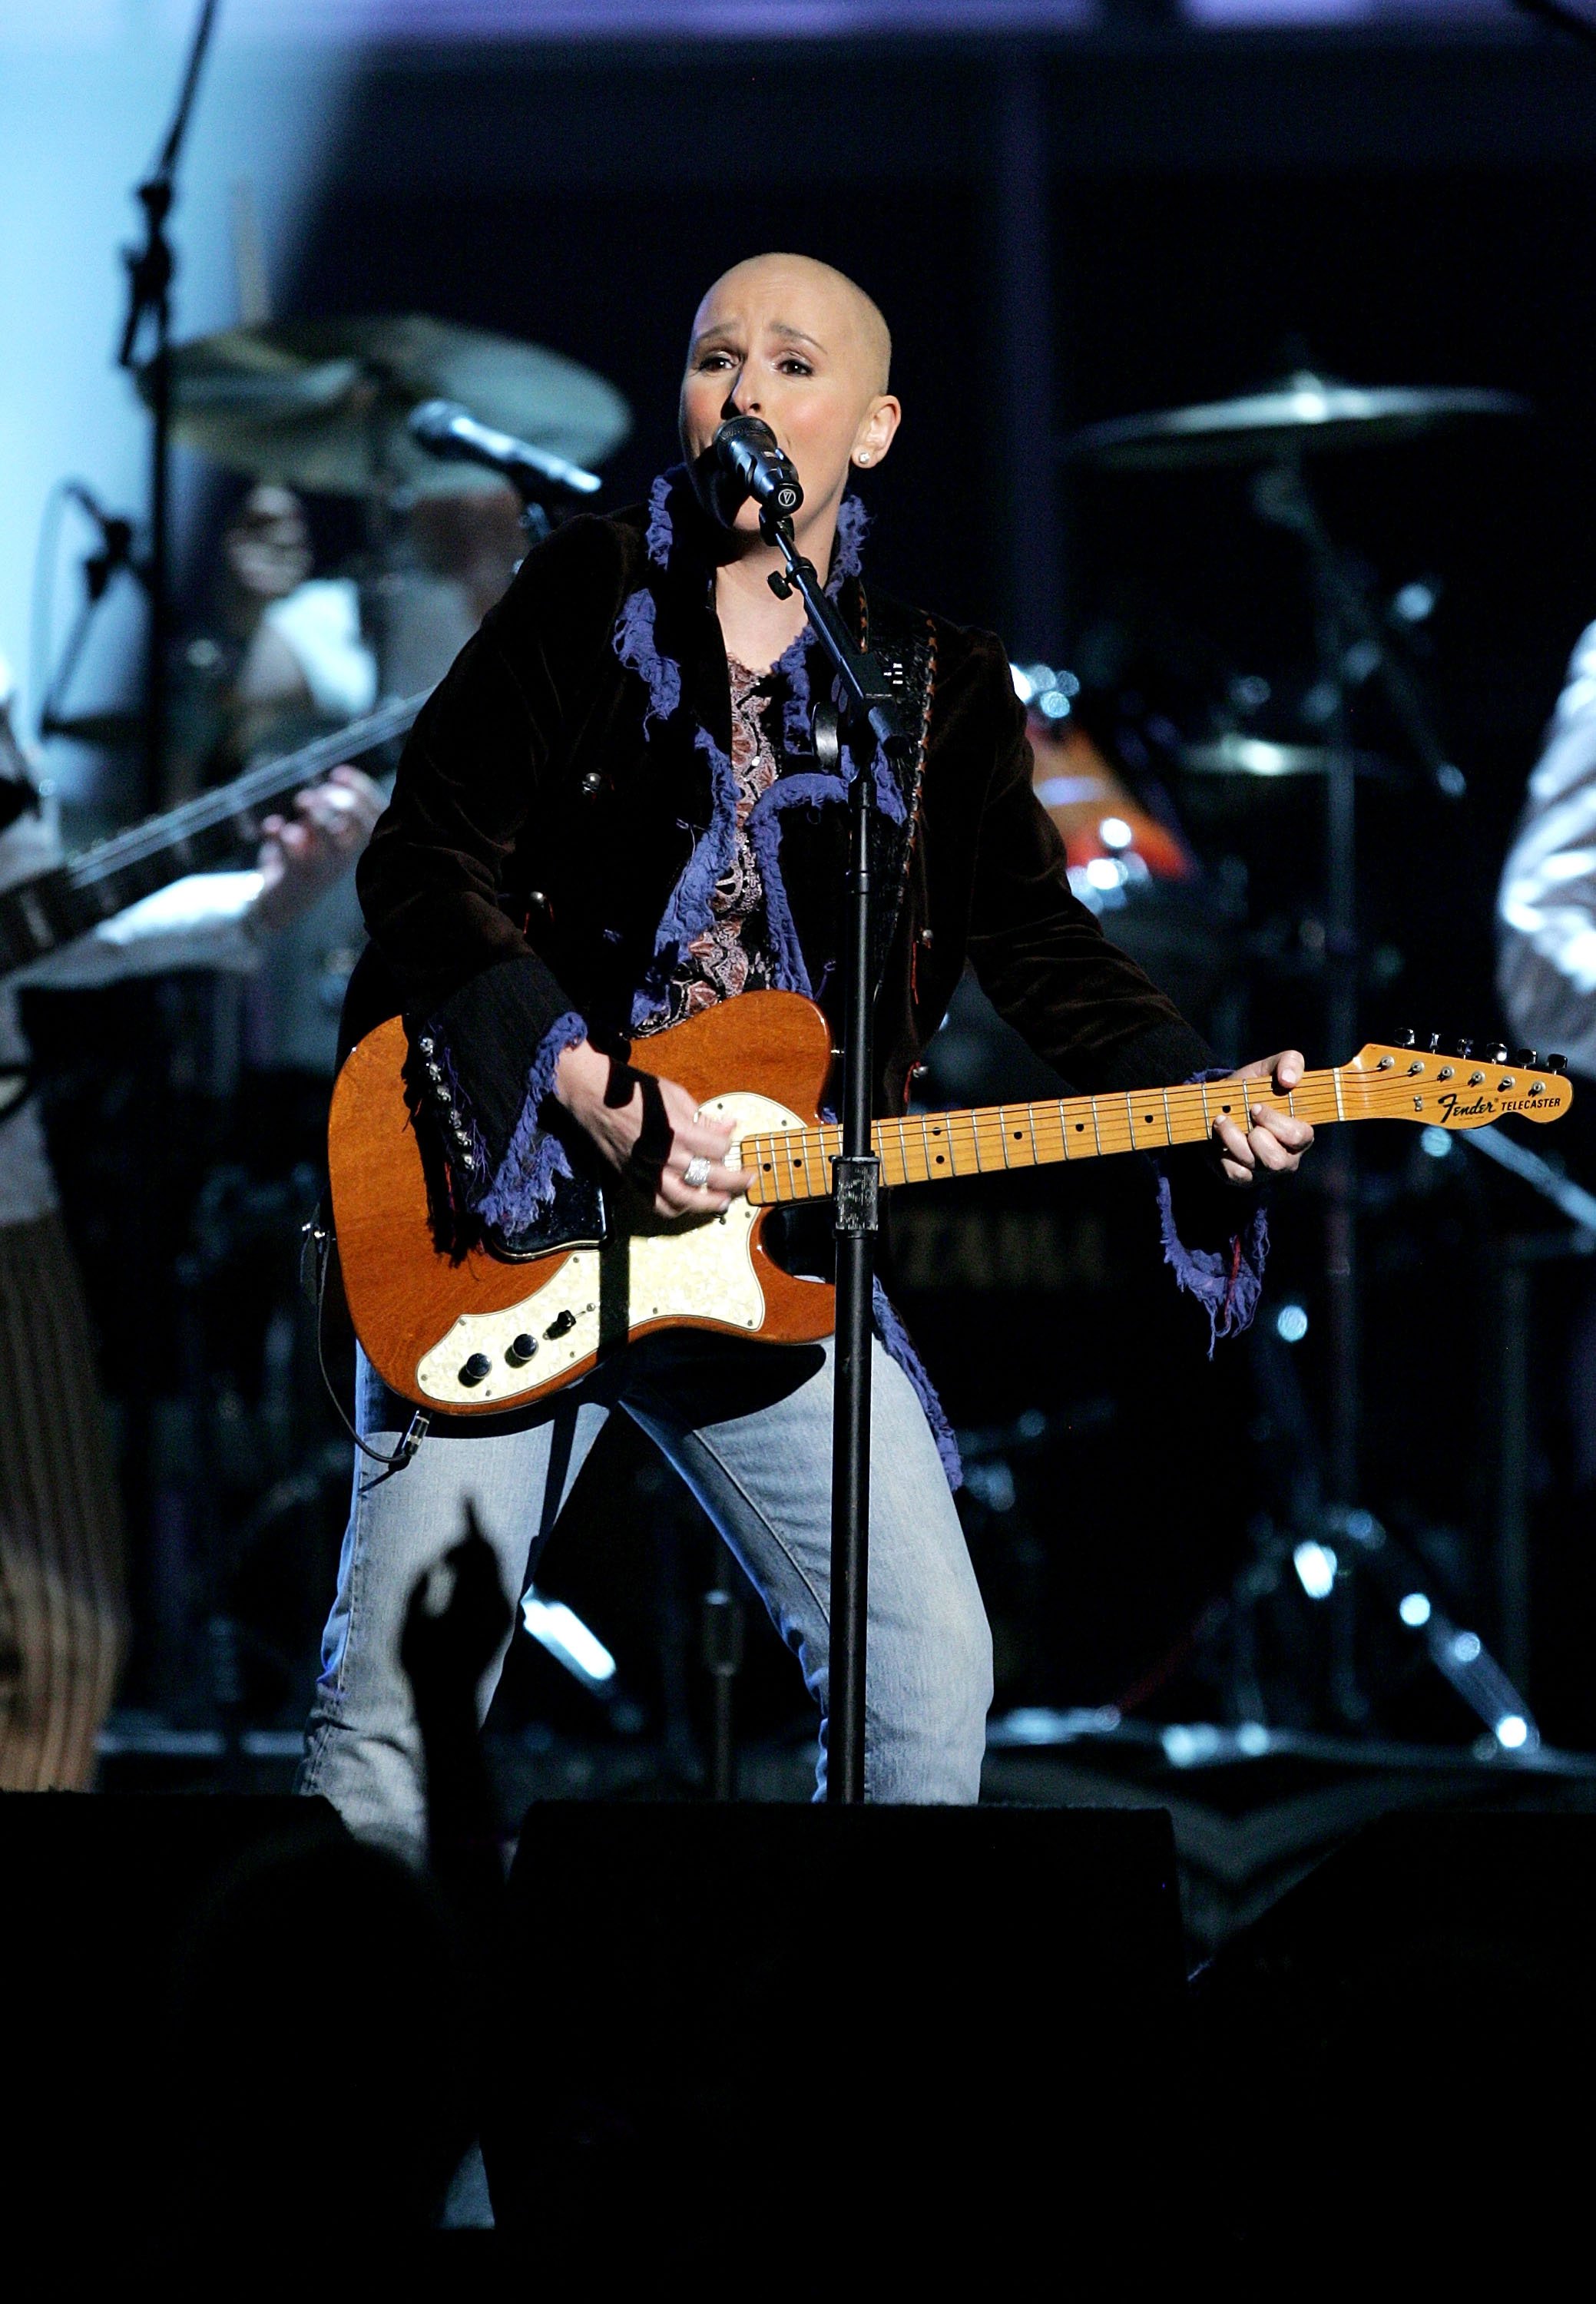 Melissa Etheridge onstage during the 47th Annual Grammy Awards on February 13, 2005, in Los Angeles, California. | Source: Frank Micelotta/Getty Images